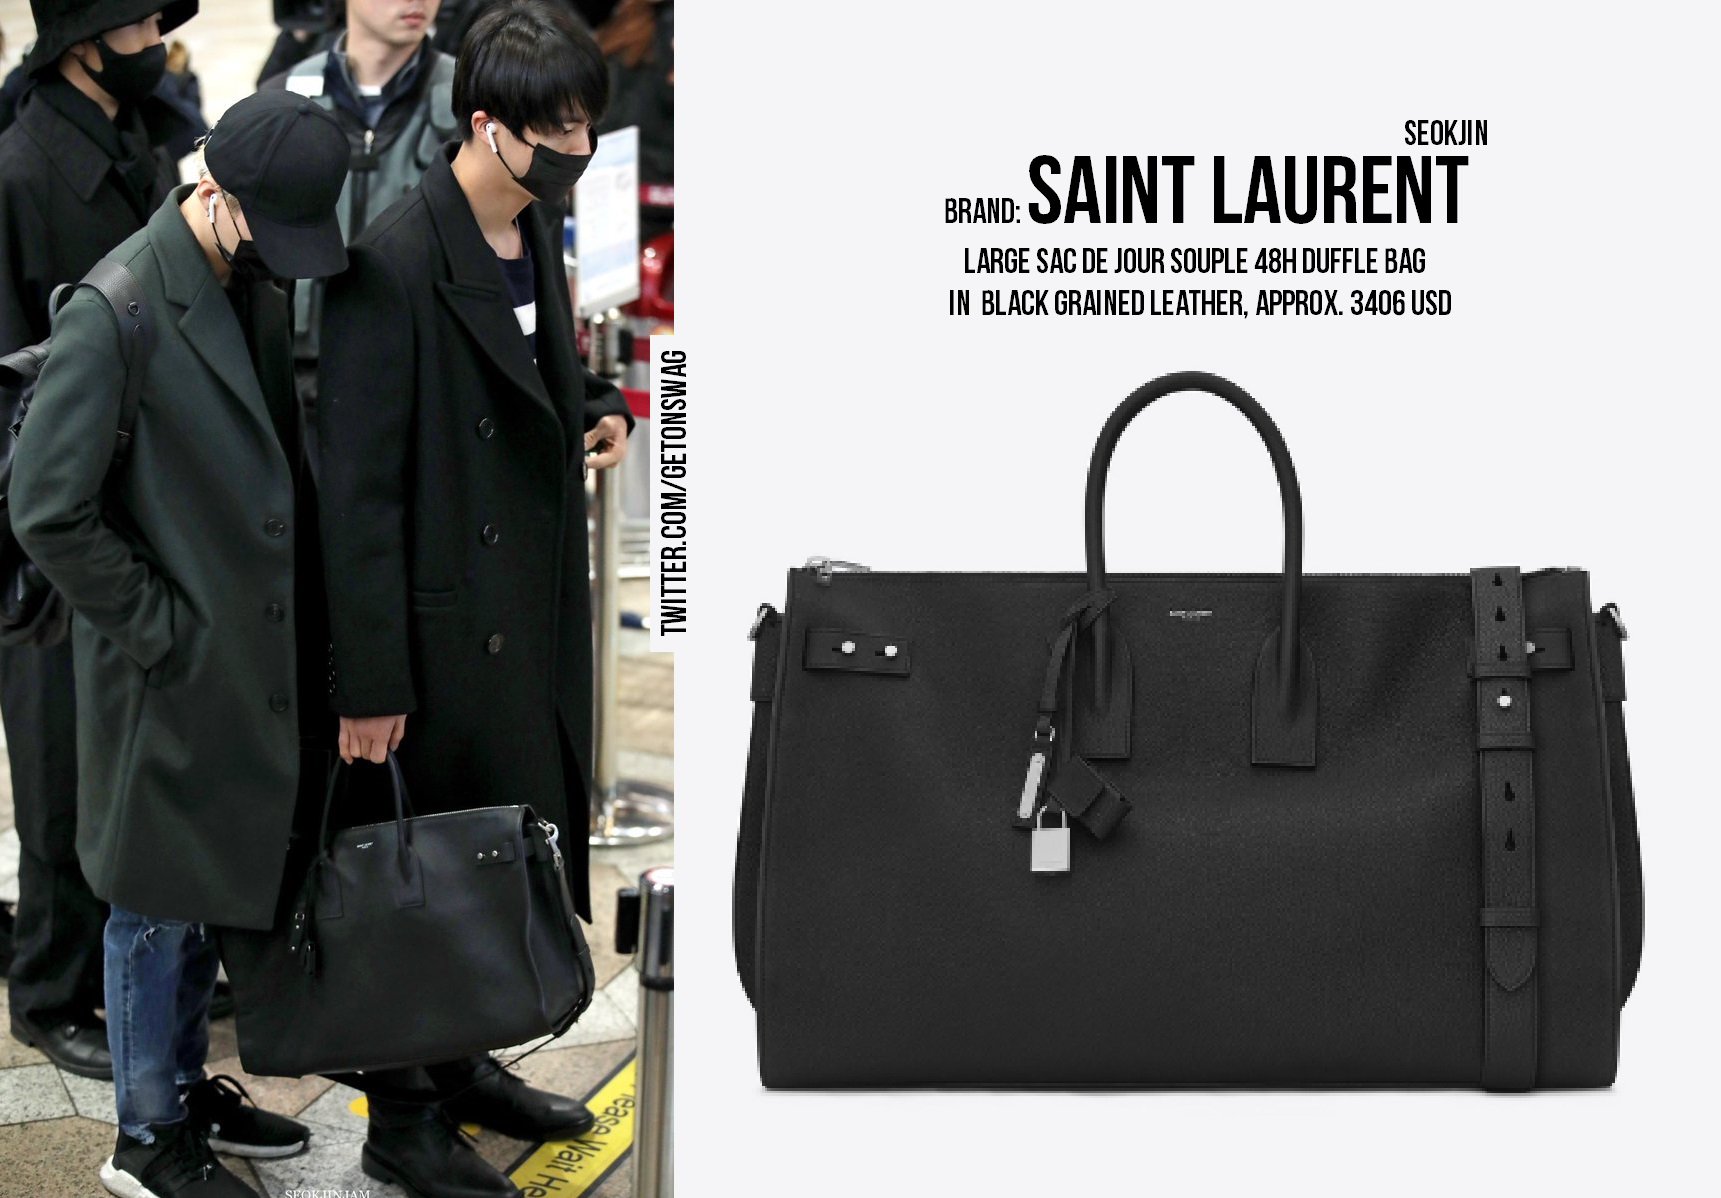 SLAY BTS - Something about Jin holding a bag just really